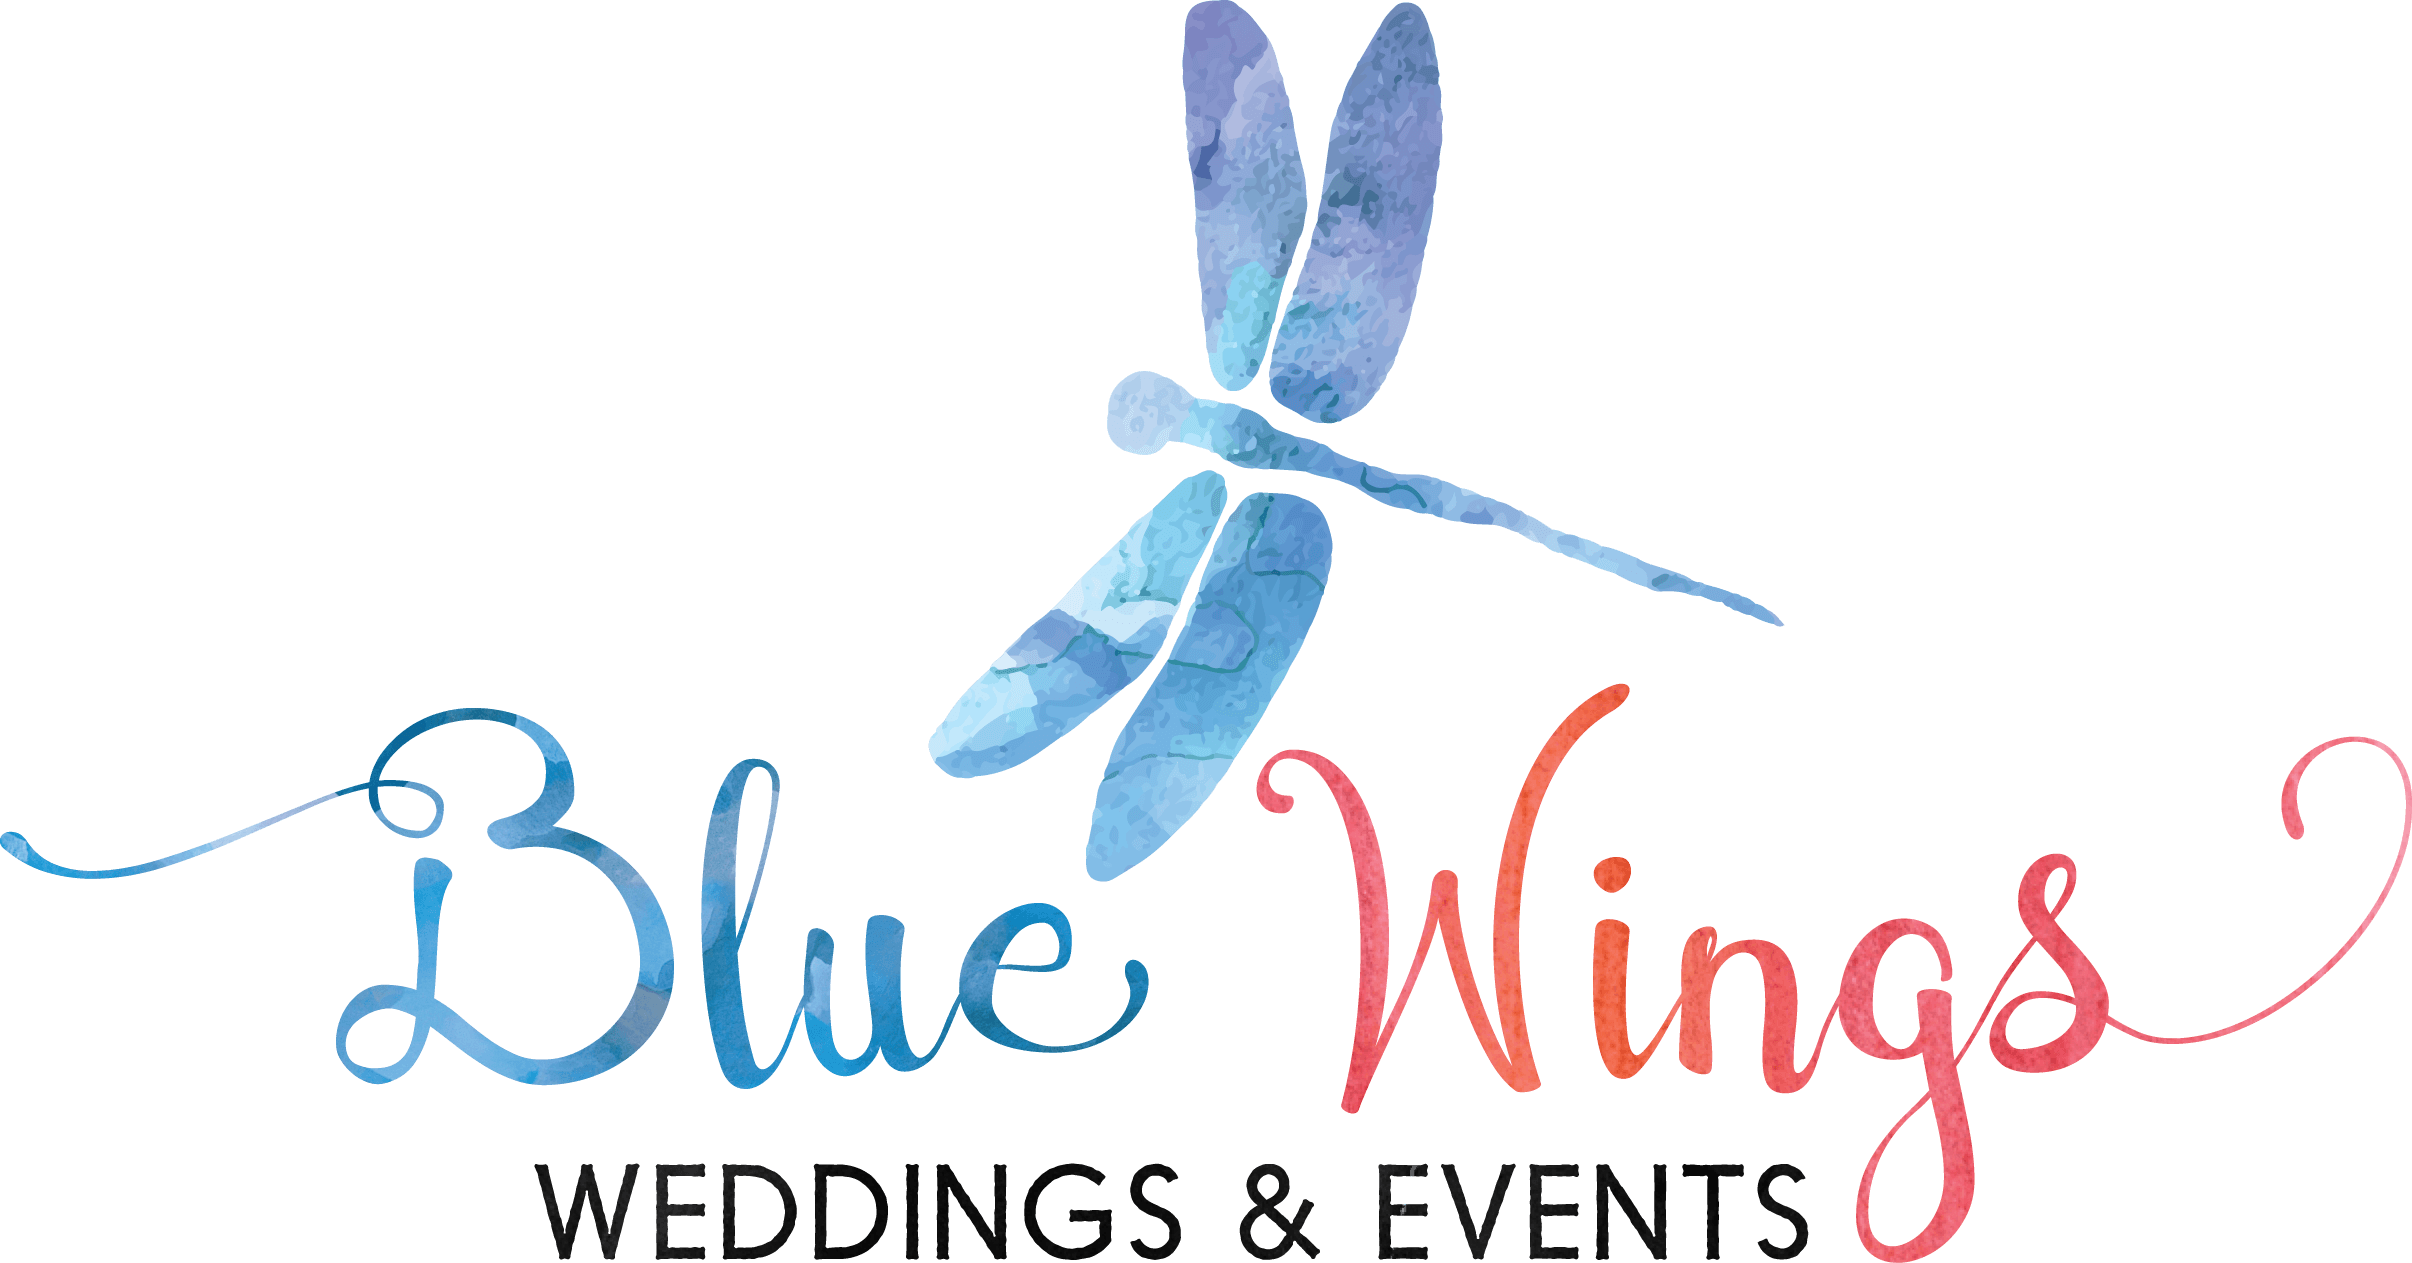 Blue Wings Logo - Blue Wings Events Name & Logo - Wedding Planner, Event Planner